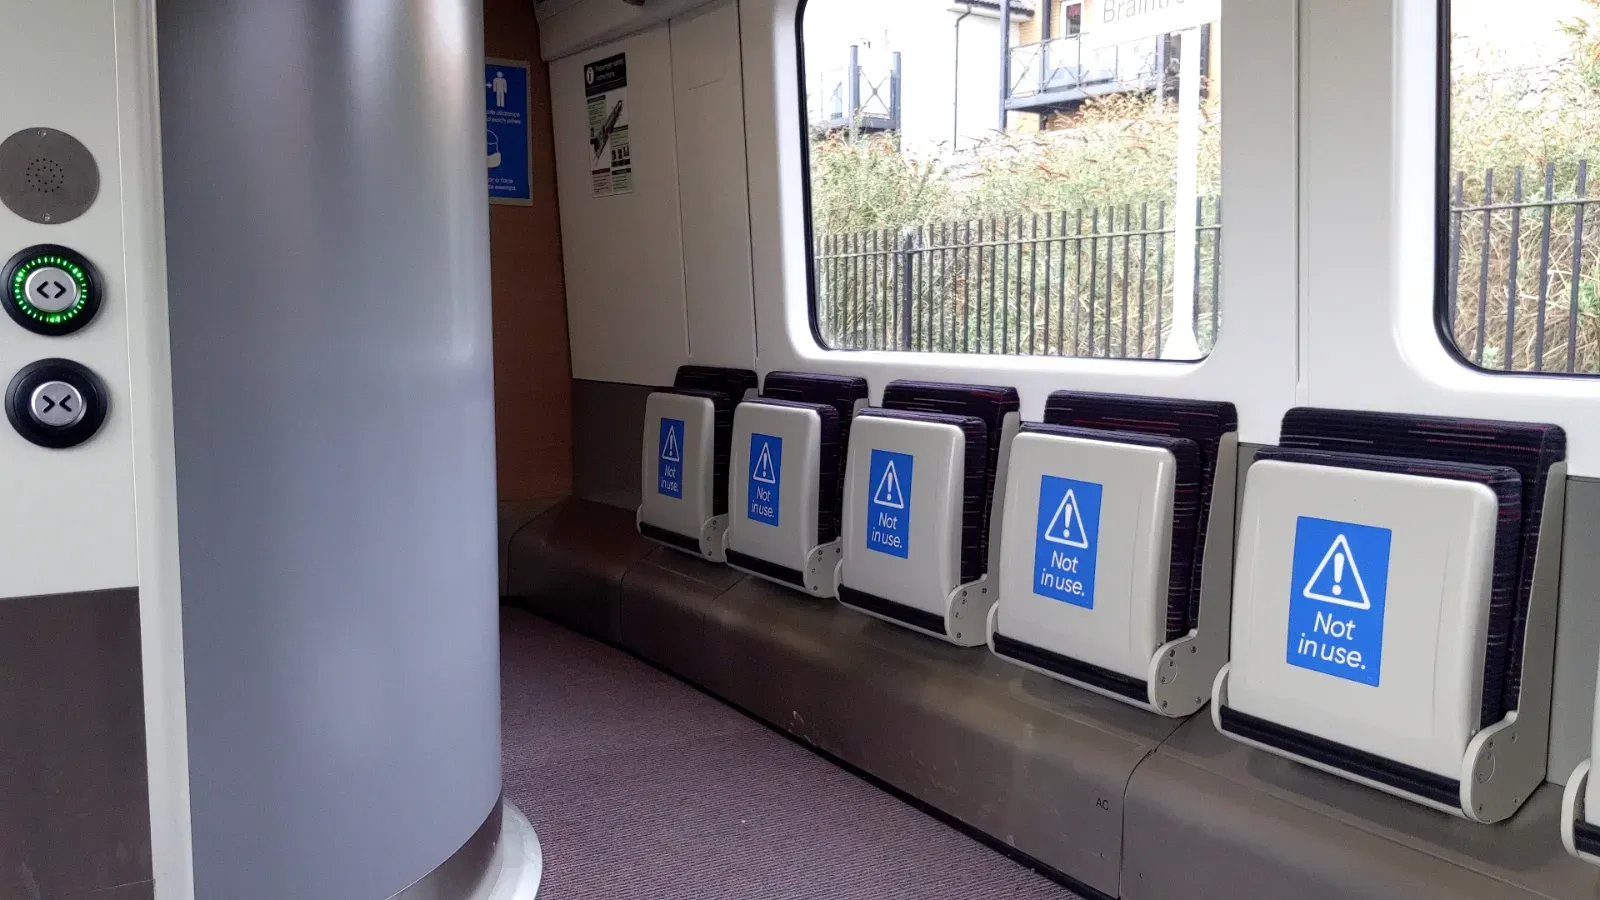 On the left are buttons to open and close the accessible toilet door, with a speaker above them. On the right are tip-up seats.